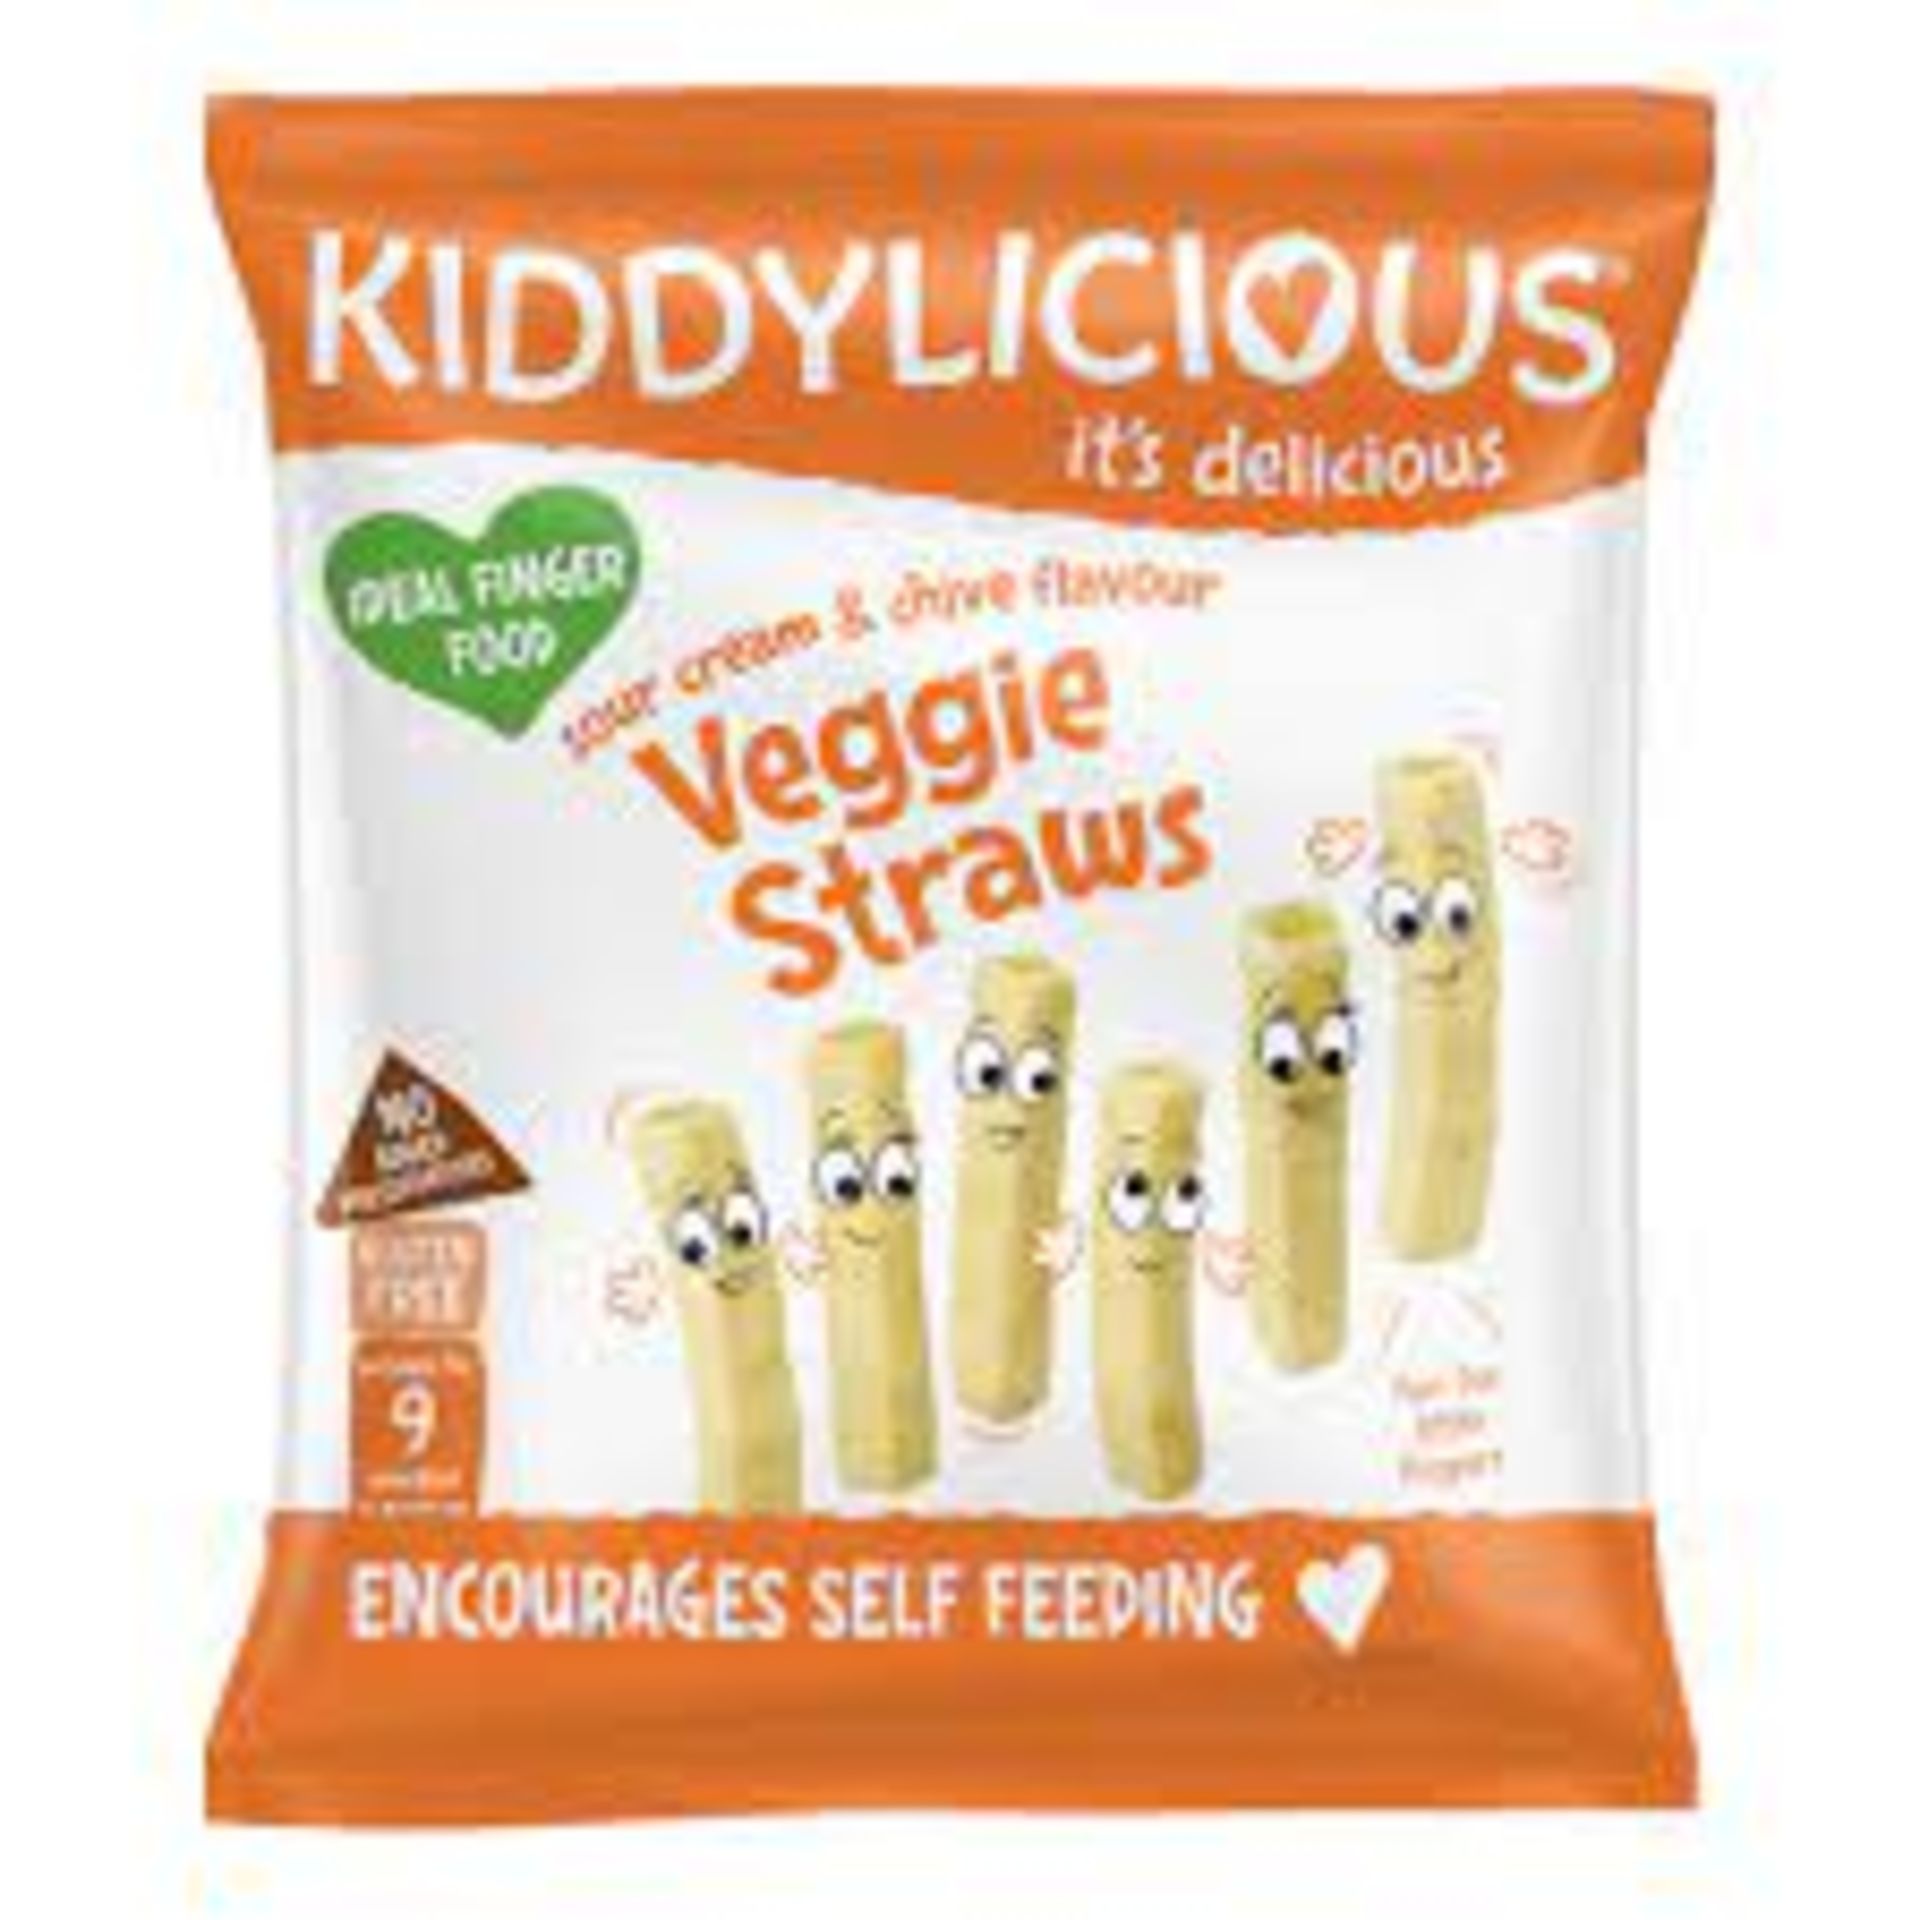 RRP £2433 (Approx. Count 471) Spw14W5344I Kiddylicious Sour Cream & Chive Veggie Straws -